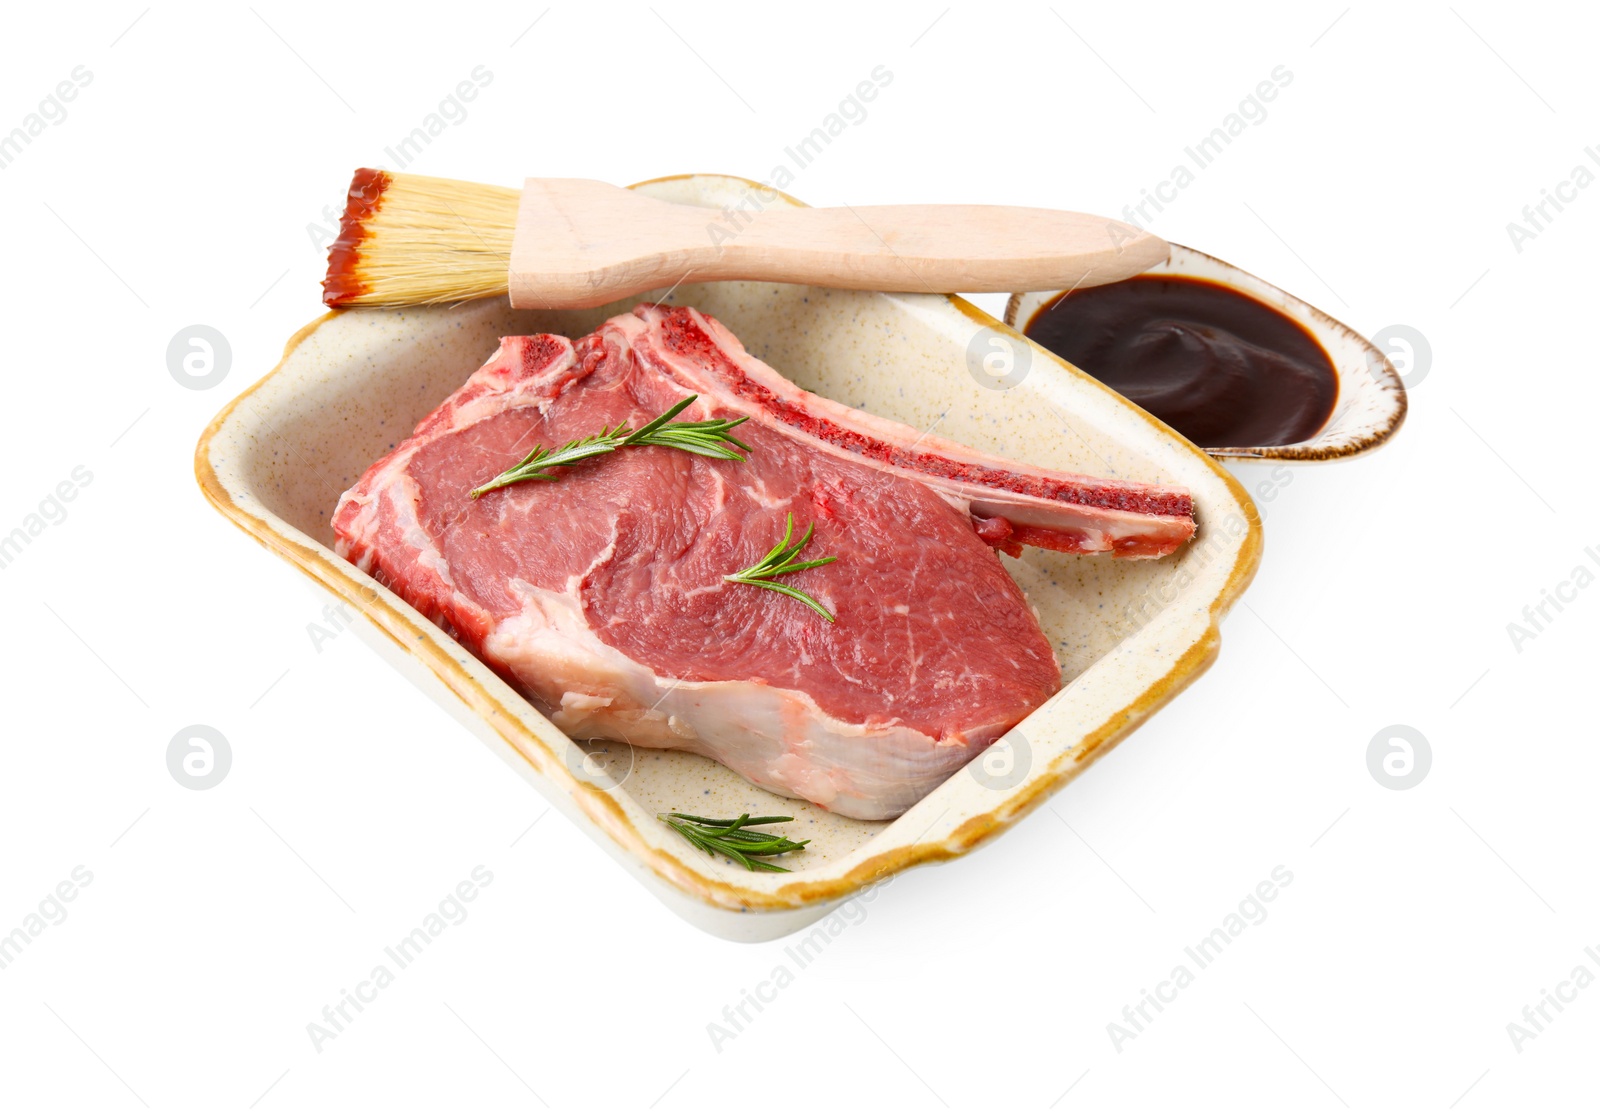 Photo of Raw meat, rosemary and brush with marinade isolated on white